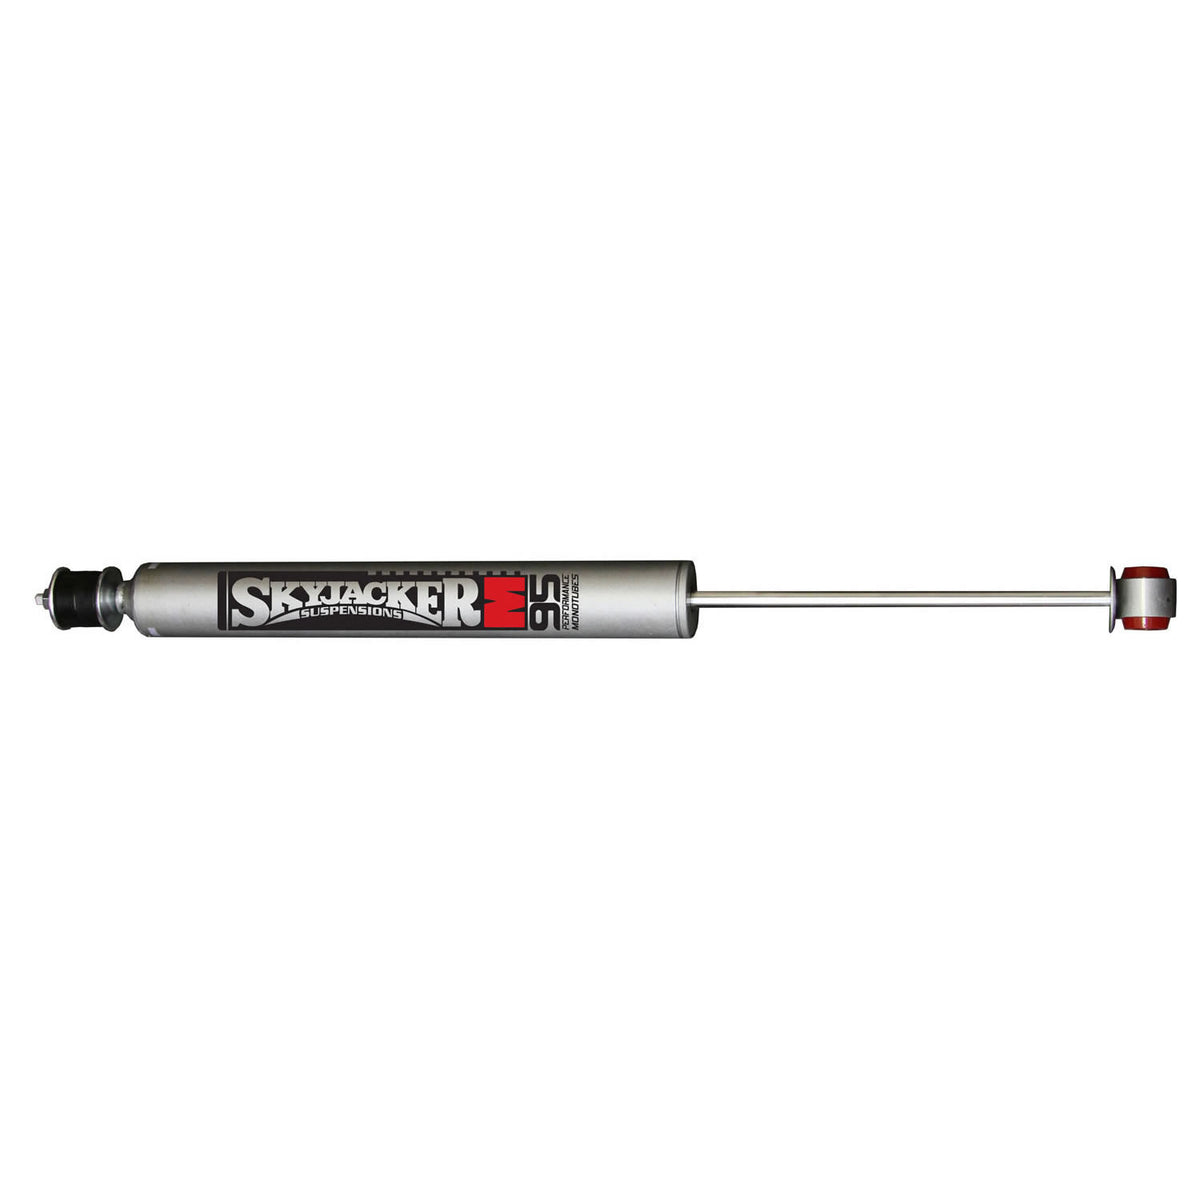 M95 Performance Monotube Shock Absorber 05-8 Ford F-250/F-350 Super Duty 26.63 Inch Extended 15.65 Inch Collapsed Skyjacker